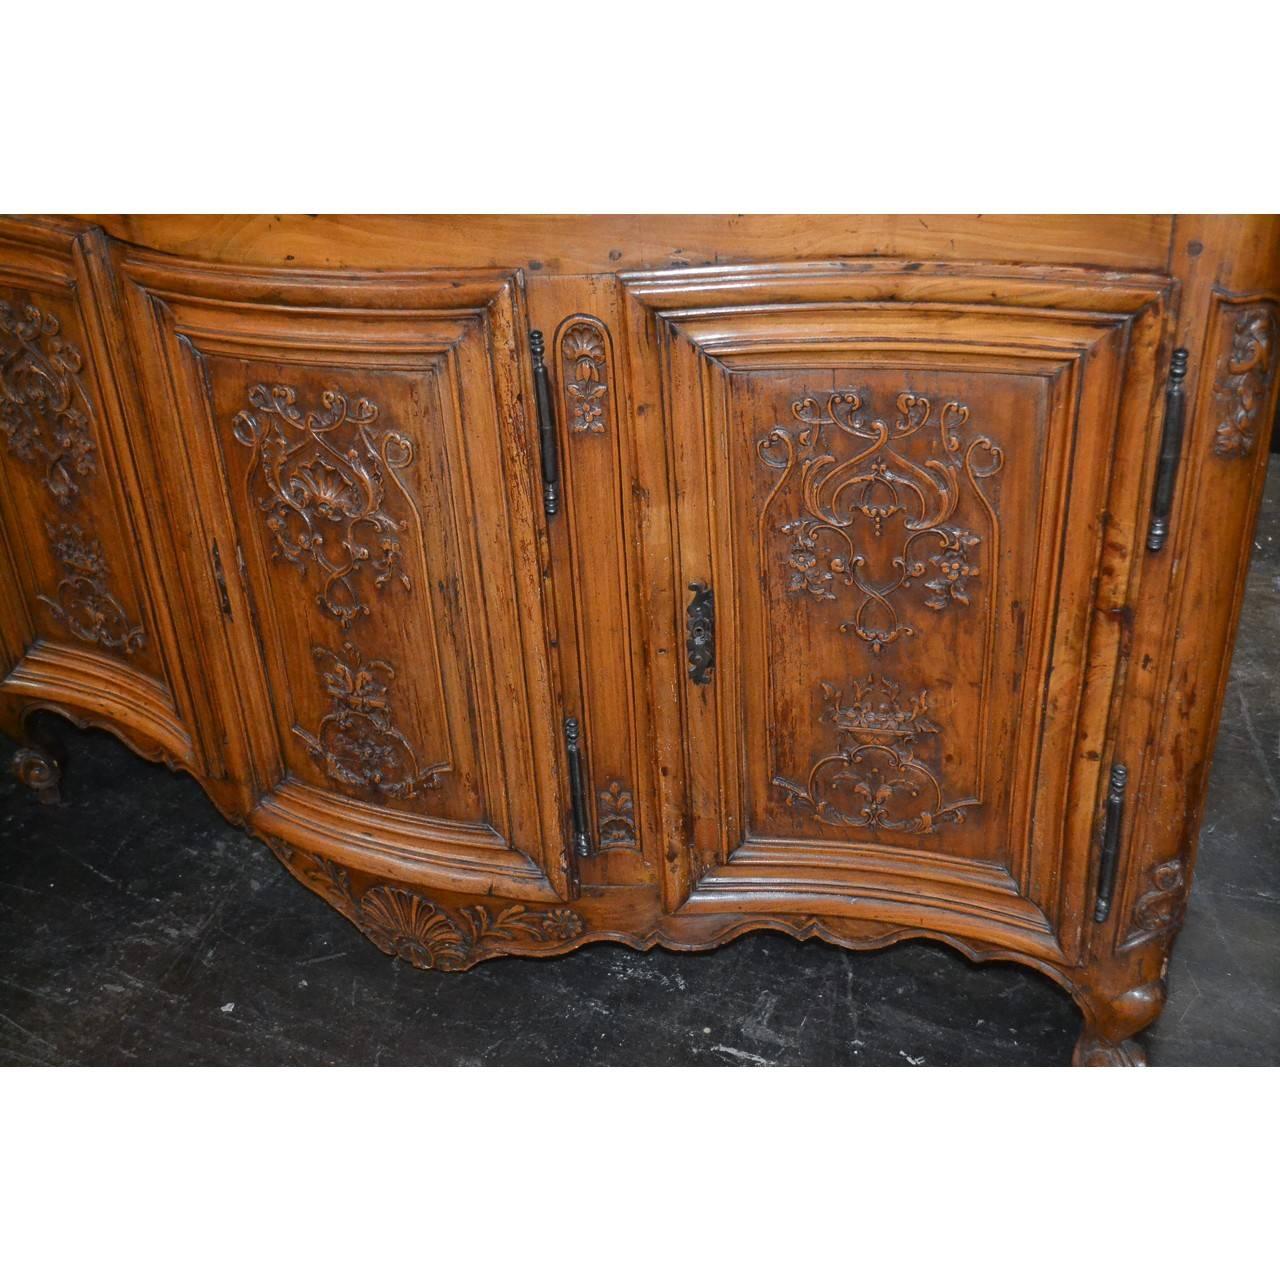 Fabulous 18th century French serpentine fronted buffet or server from Provence, crafted of chestnut with a finely aged patina. The three cupboard doors and shaped skirt with outstanding relief carvings depicting shells, stylized vines and leaves,